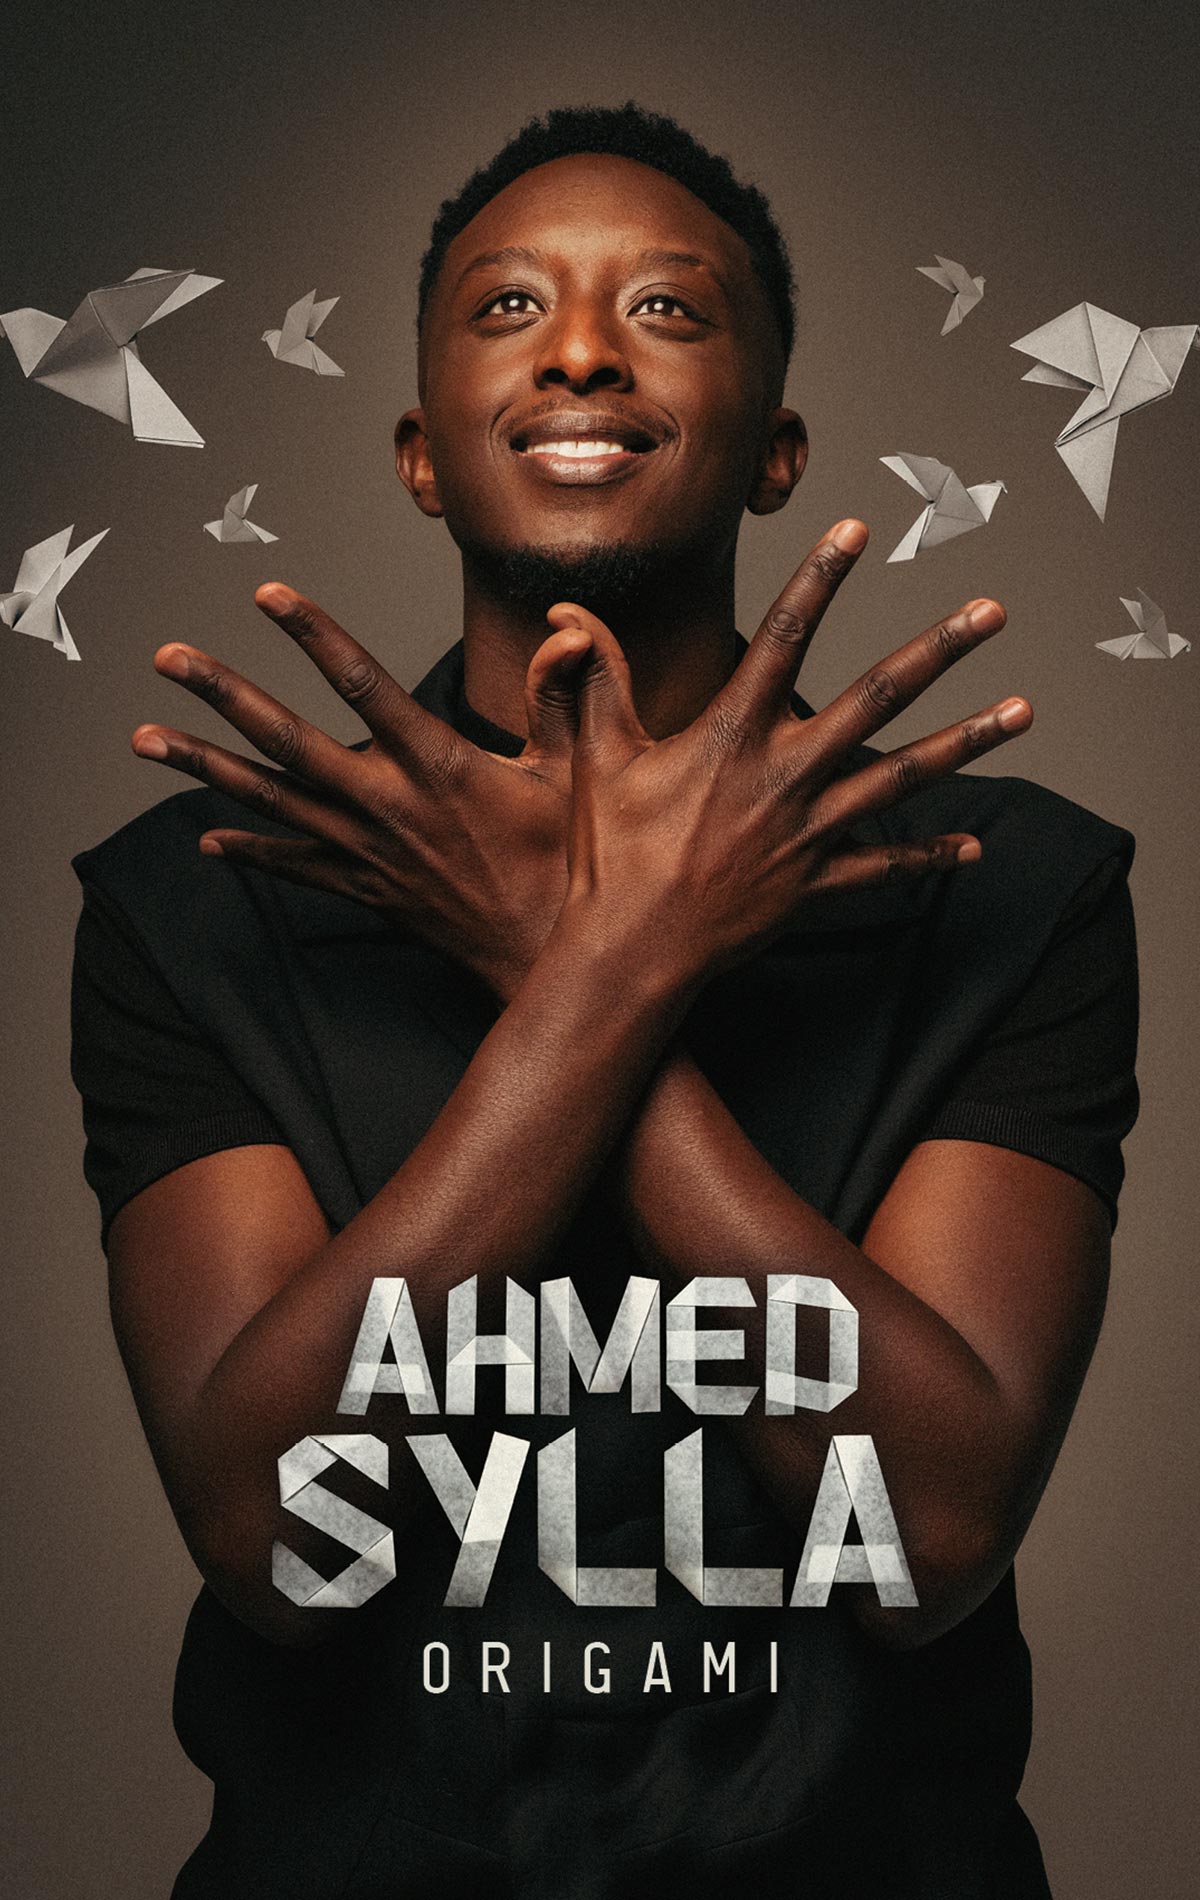 Ahmed Sylla at L'Axone Montbeliard Tickets